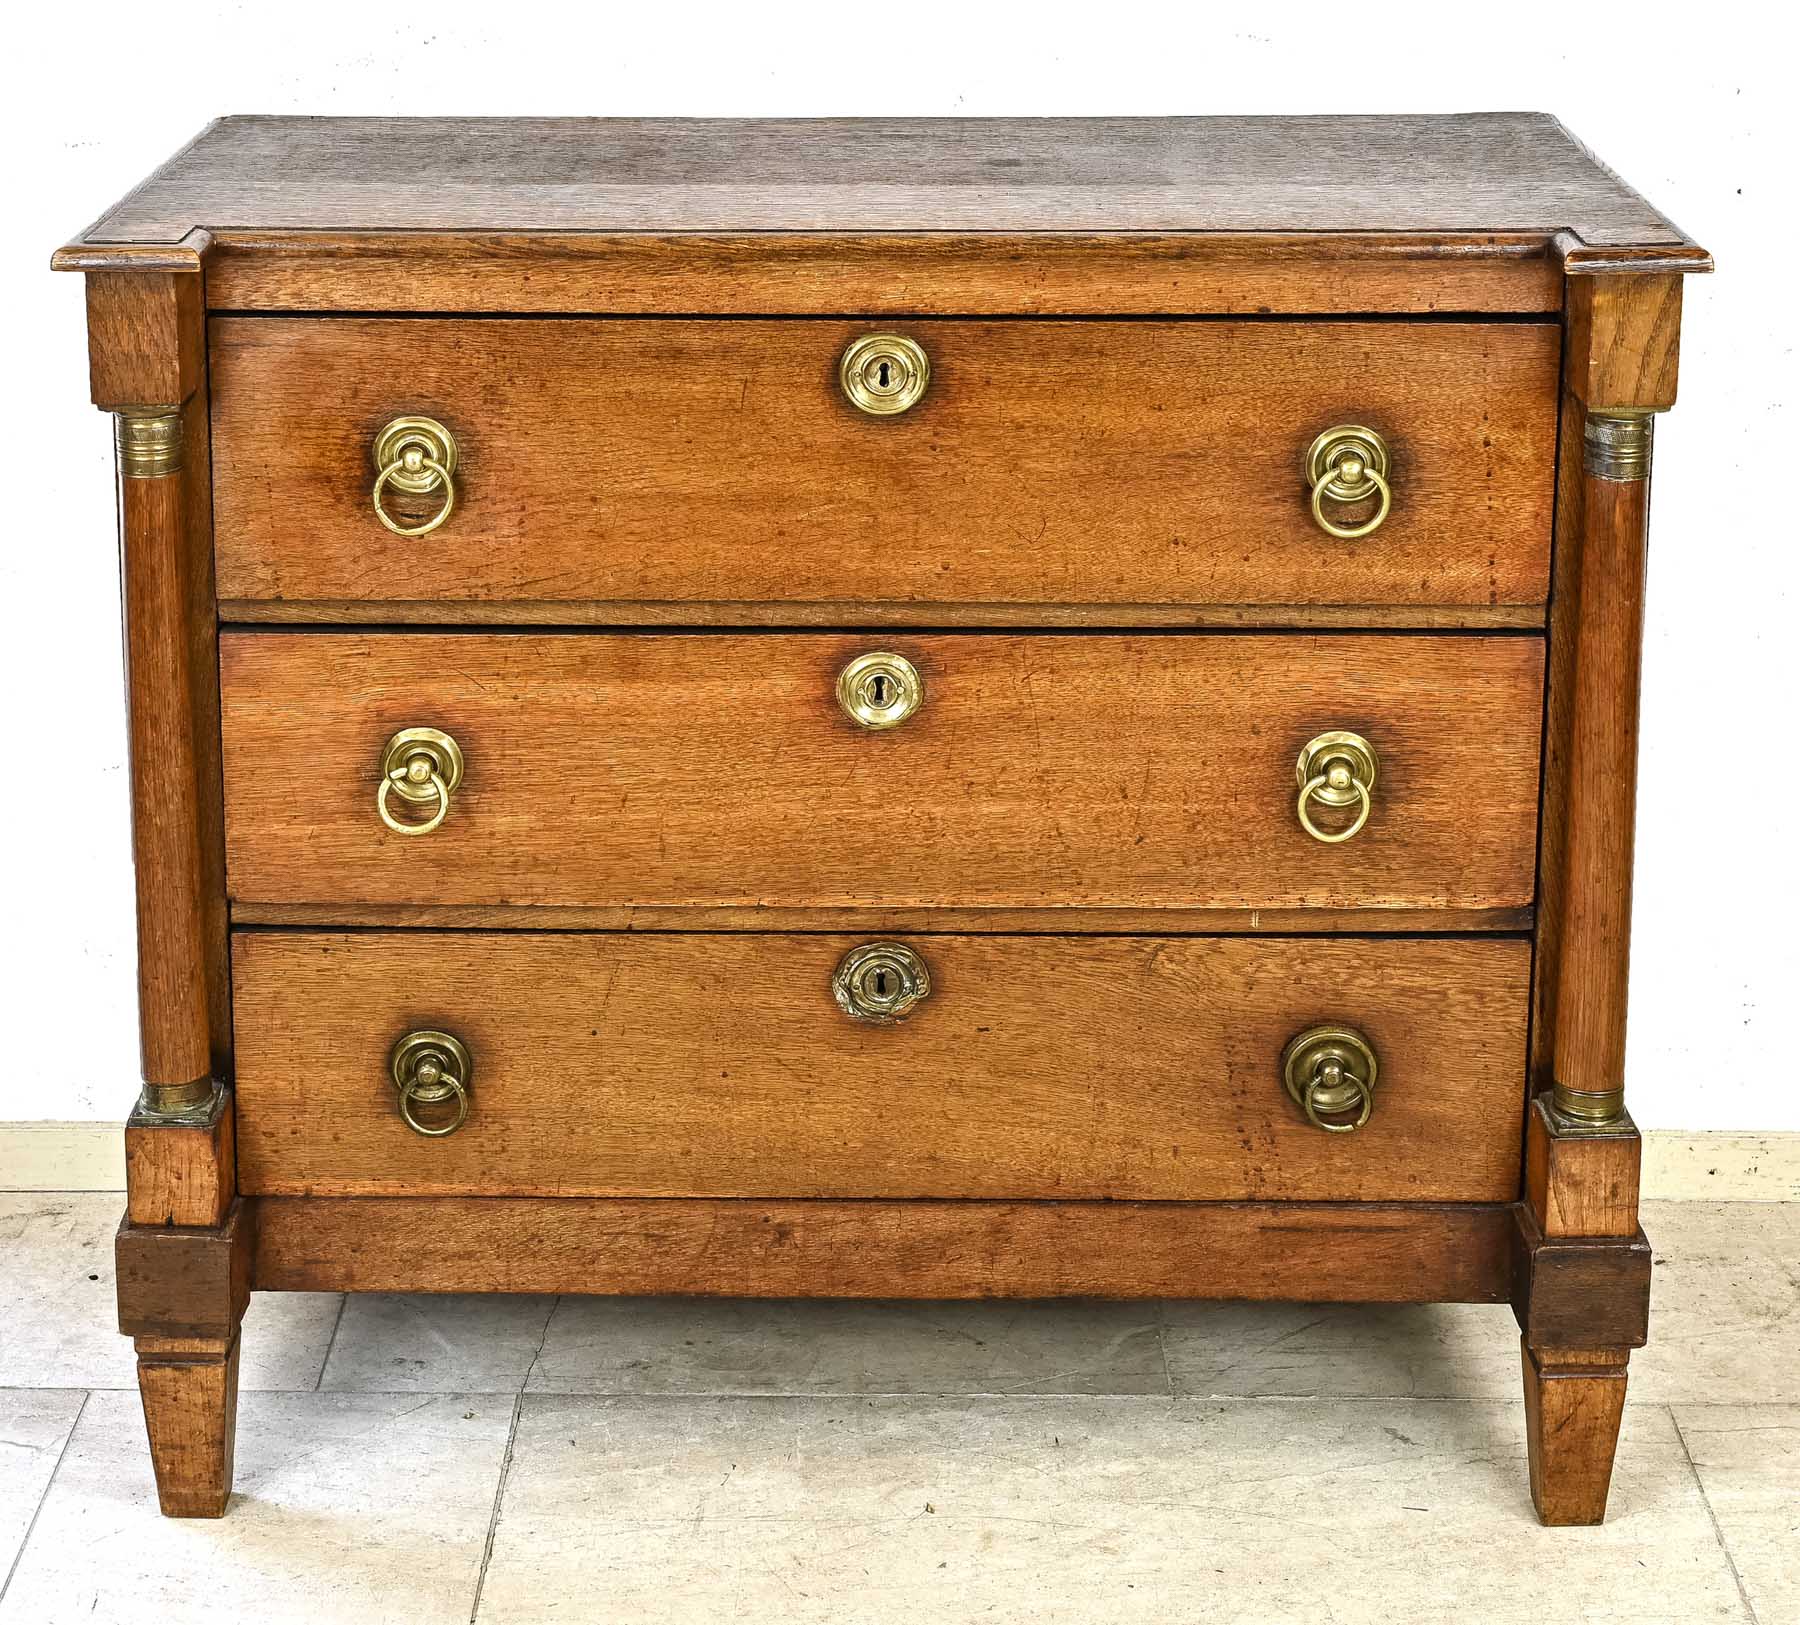 Antique chest of drawers, 1820